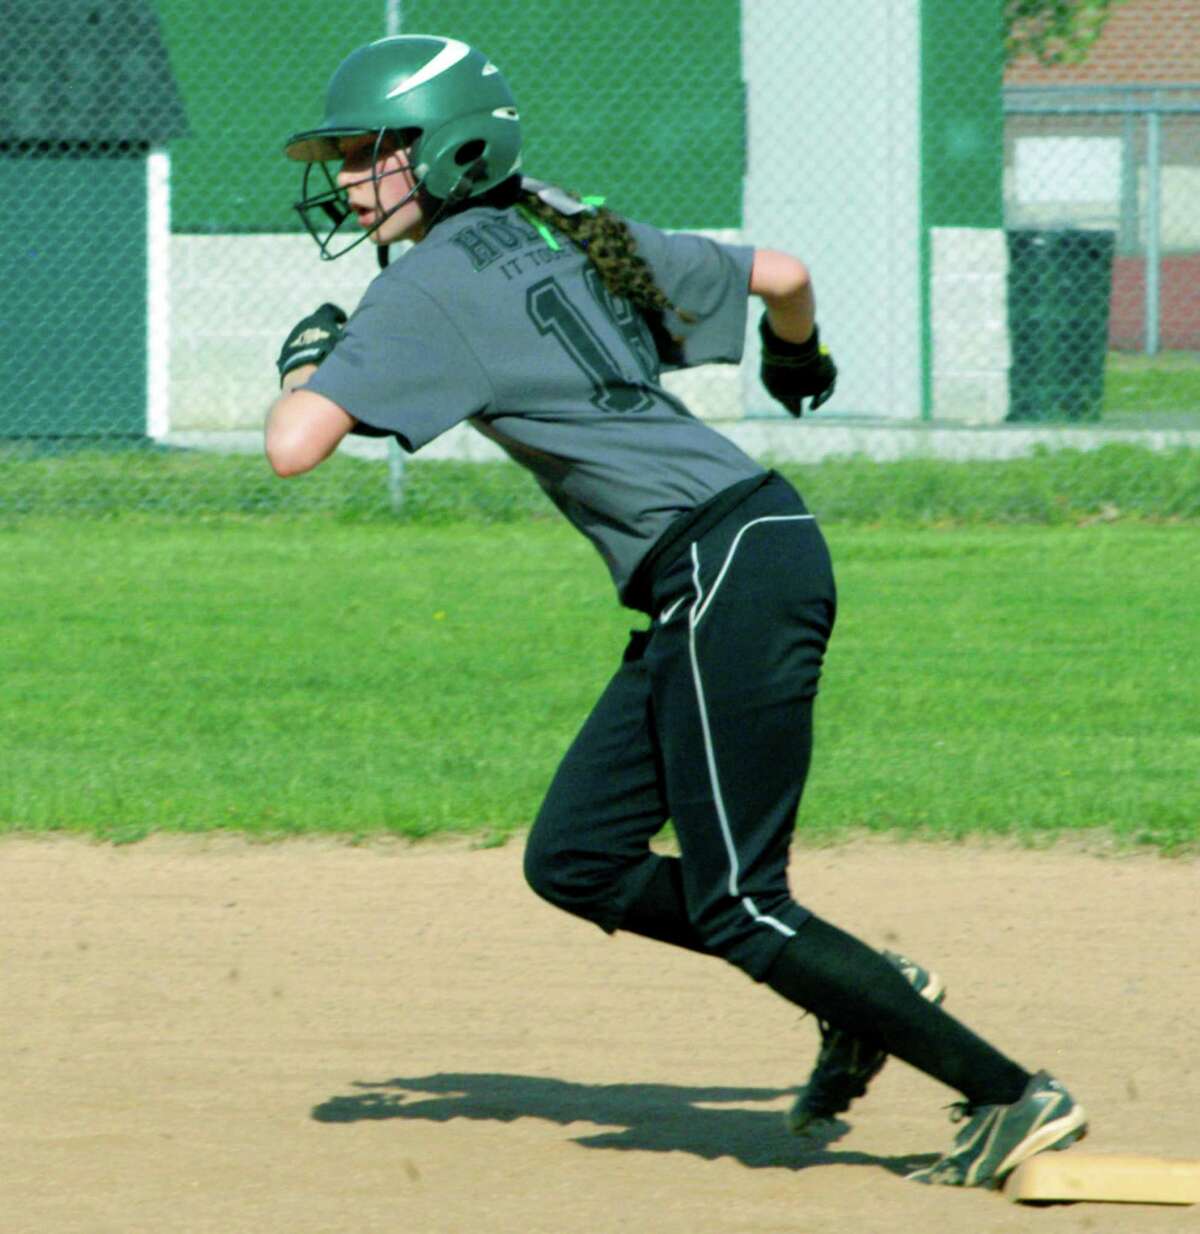 Green Wave senior Emily Delaney gets a quick break from second base during New Milford High School softball's game vs. Pomperaug, May 11, 2015 at NMHS.